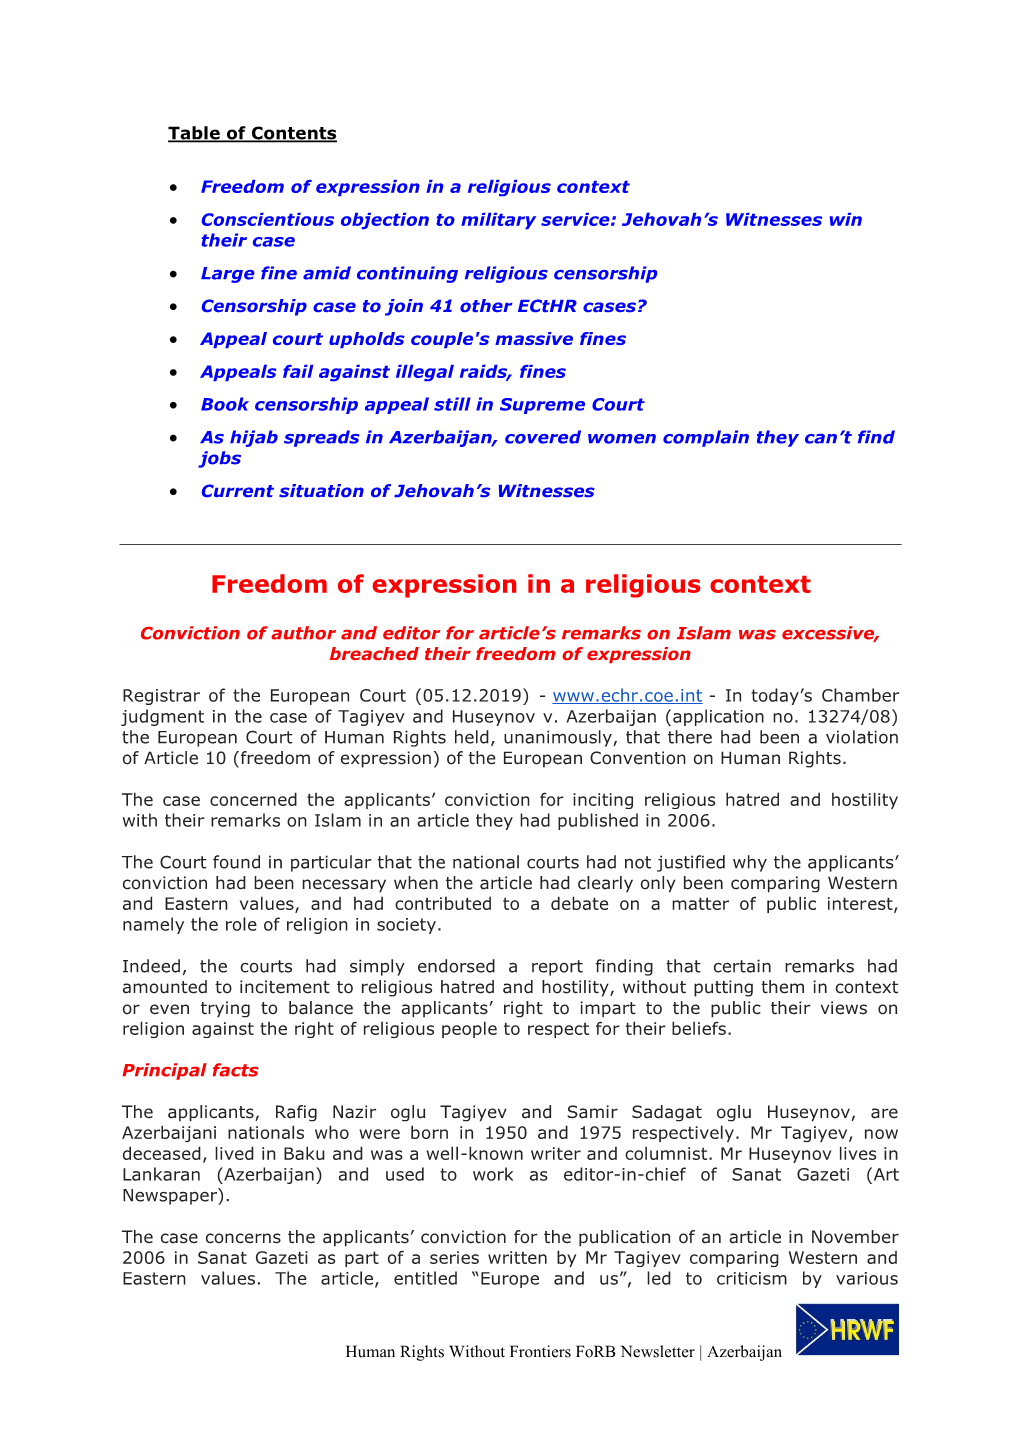 Freedom of Expression in a Religious Context